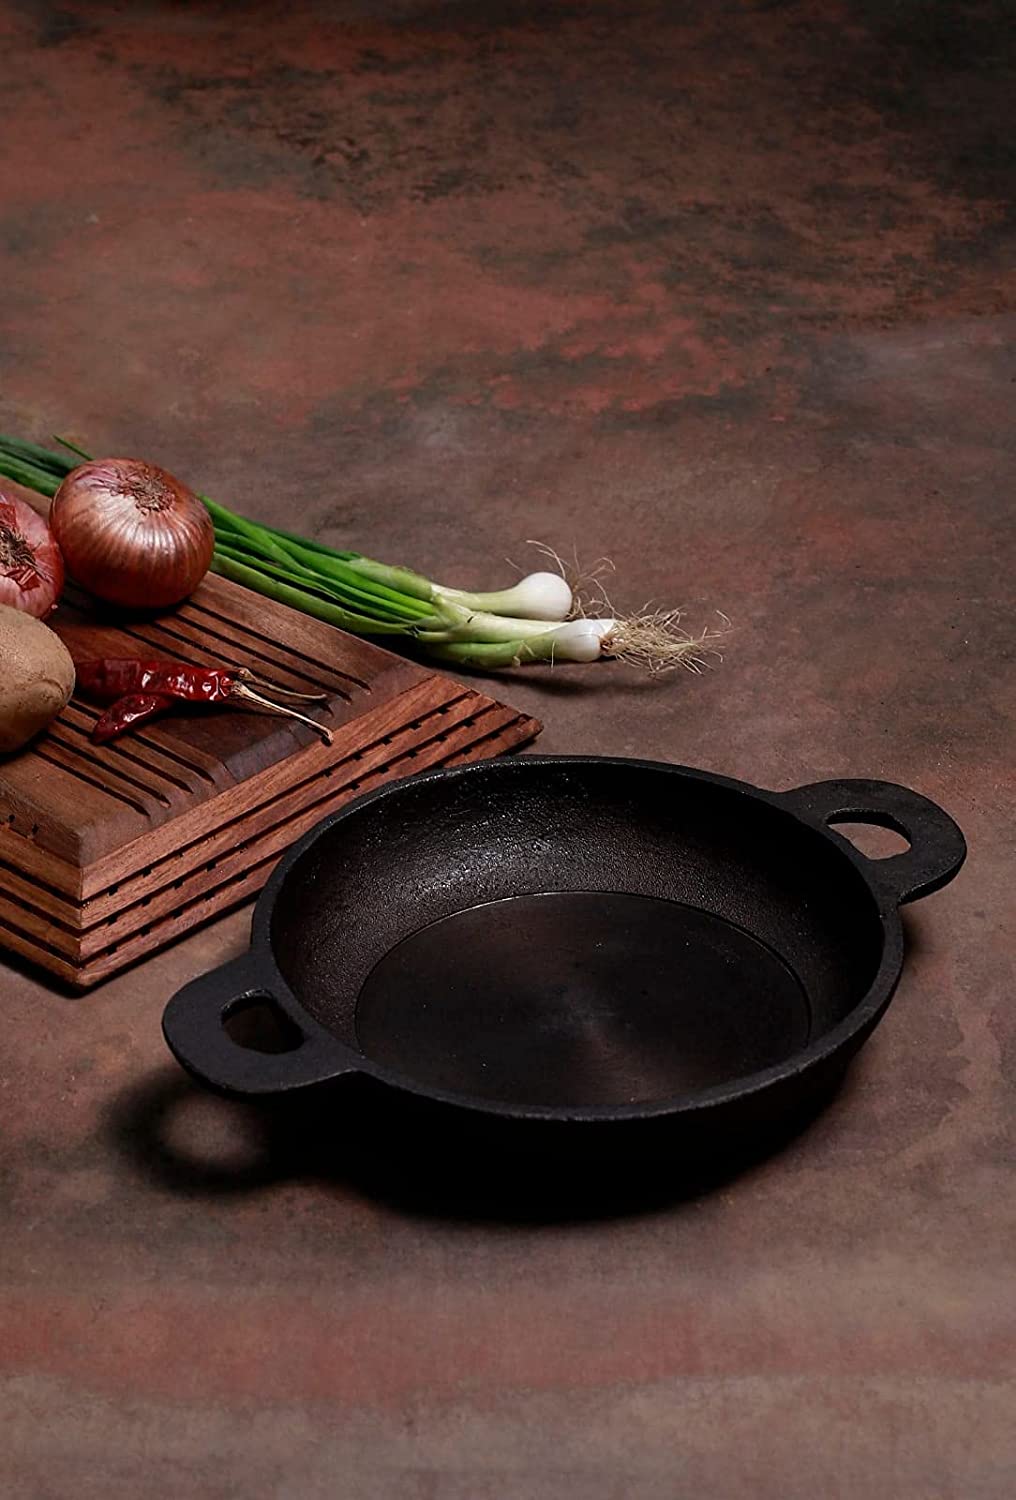 Lodge Cast Iron 8 inch skillet - Skillets & Frying Pans